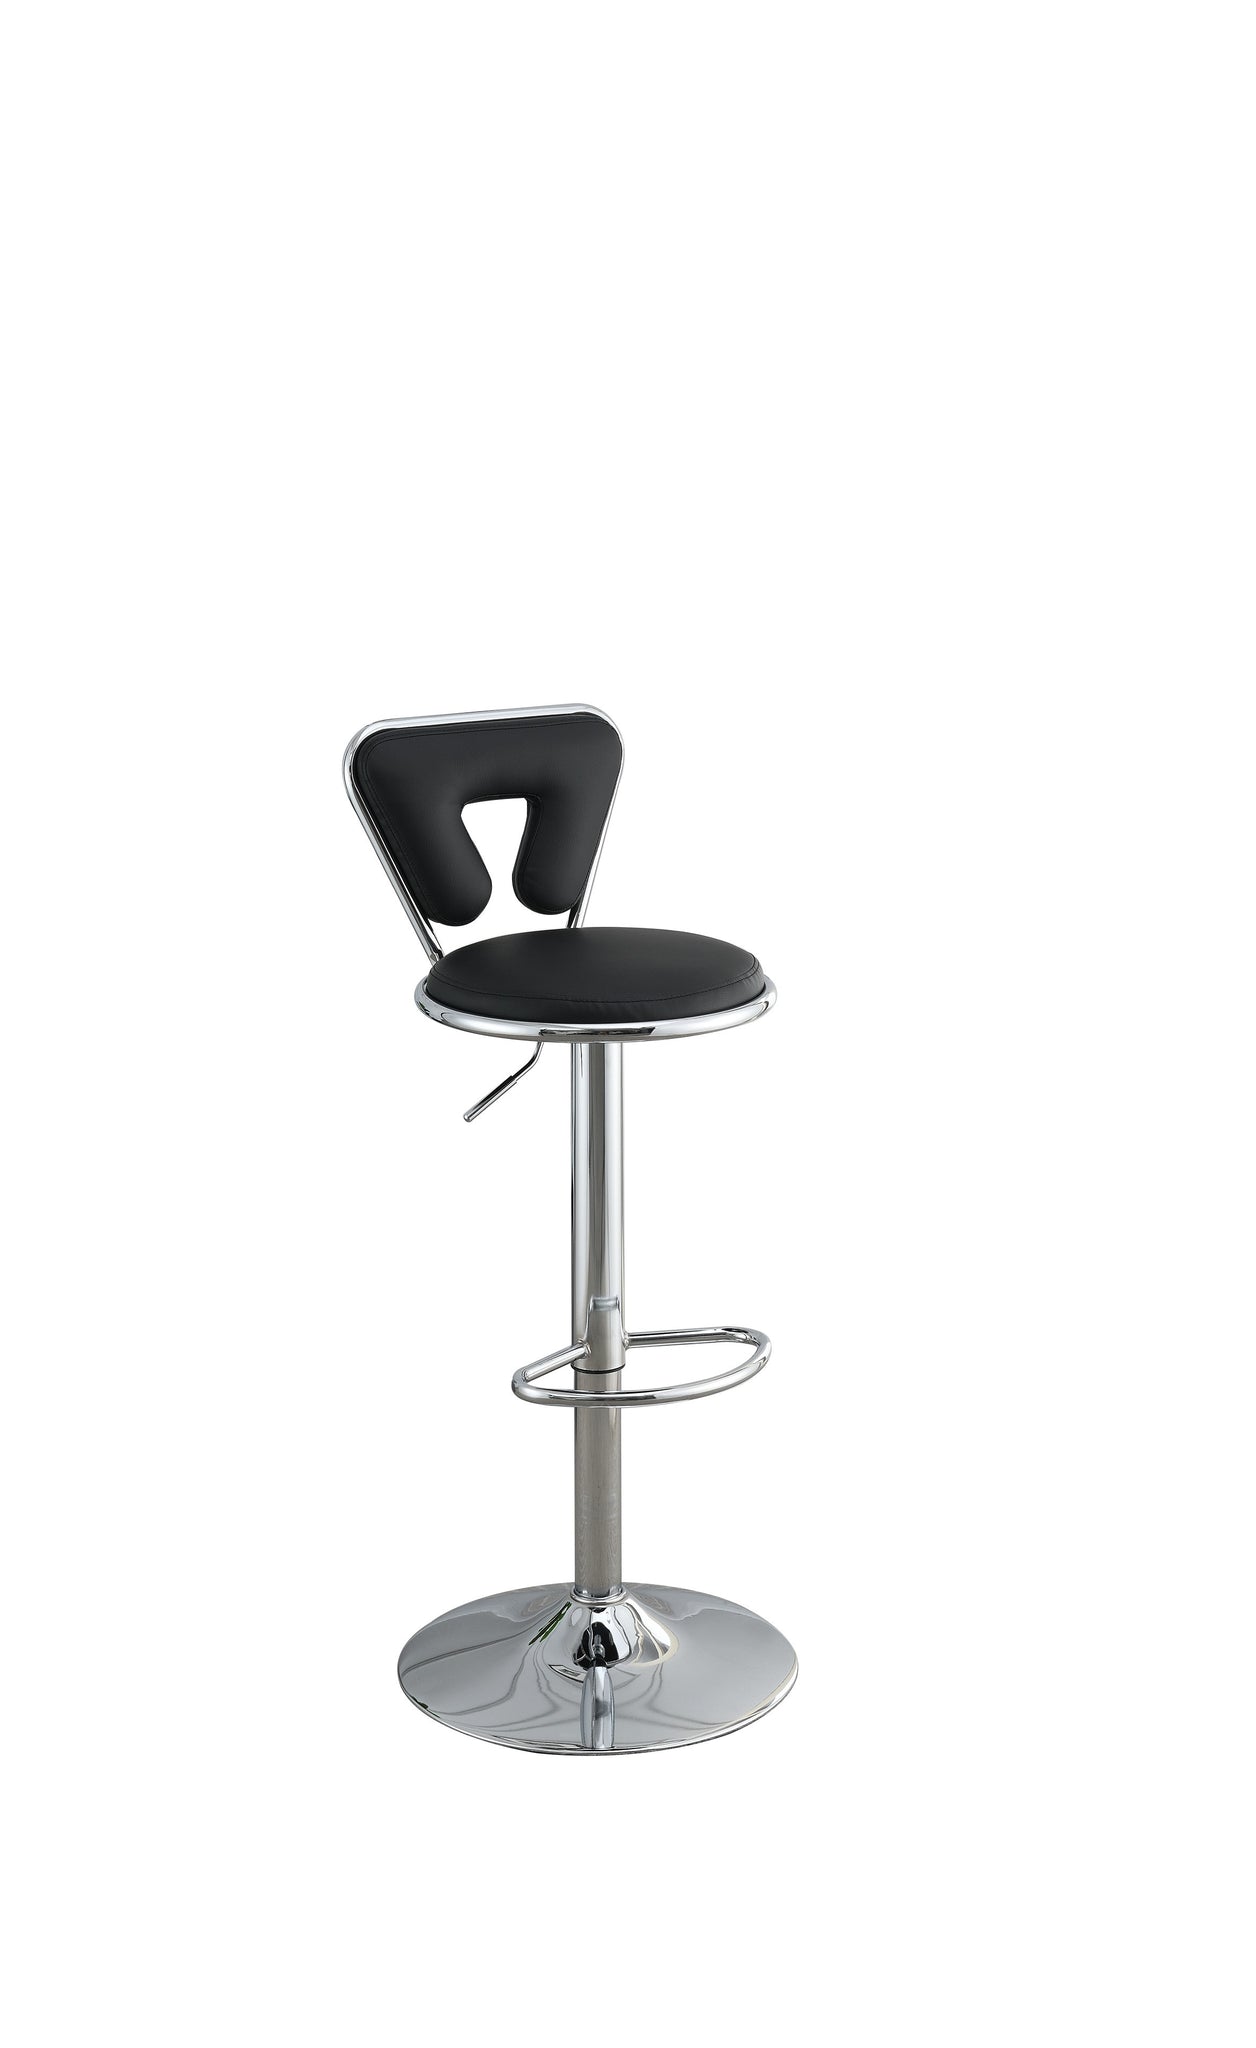 Adjustable Bar stool Gas lift Chair Black Faux Leather black-dining room-classic-contemporary-modern-bar